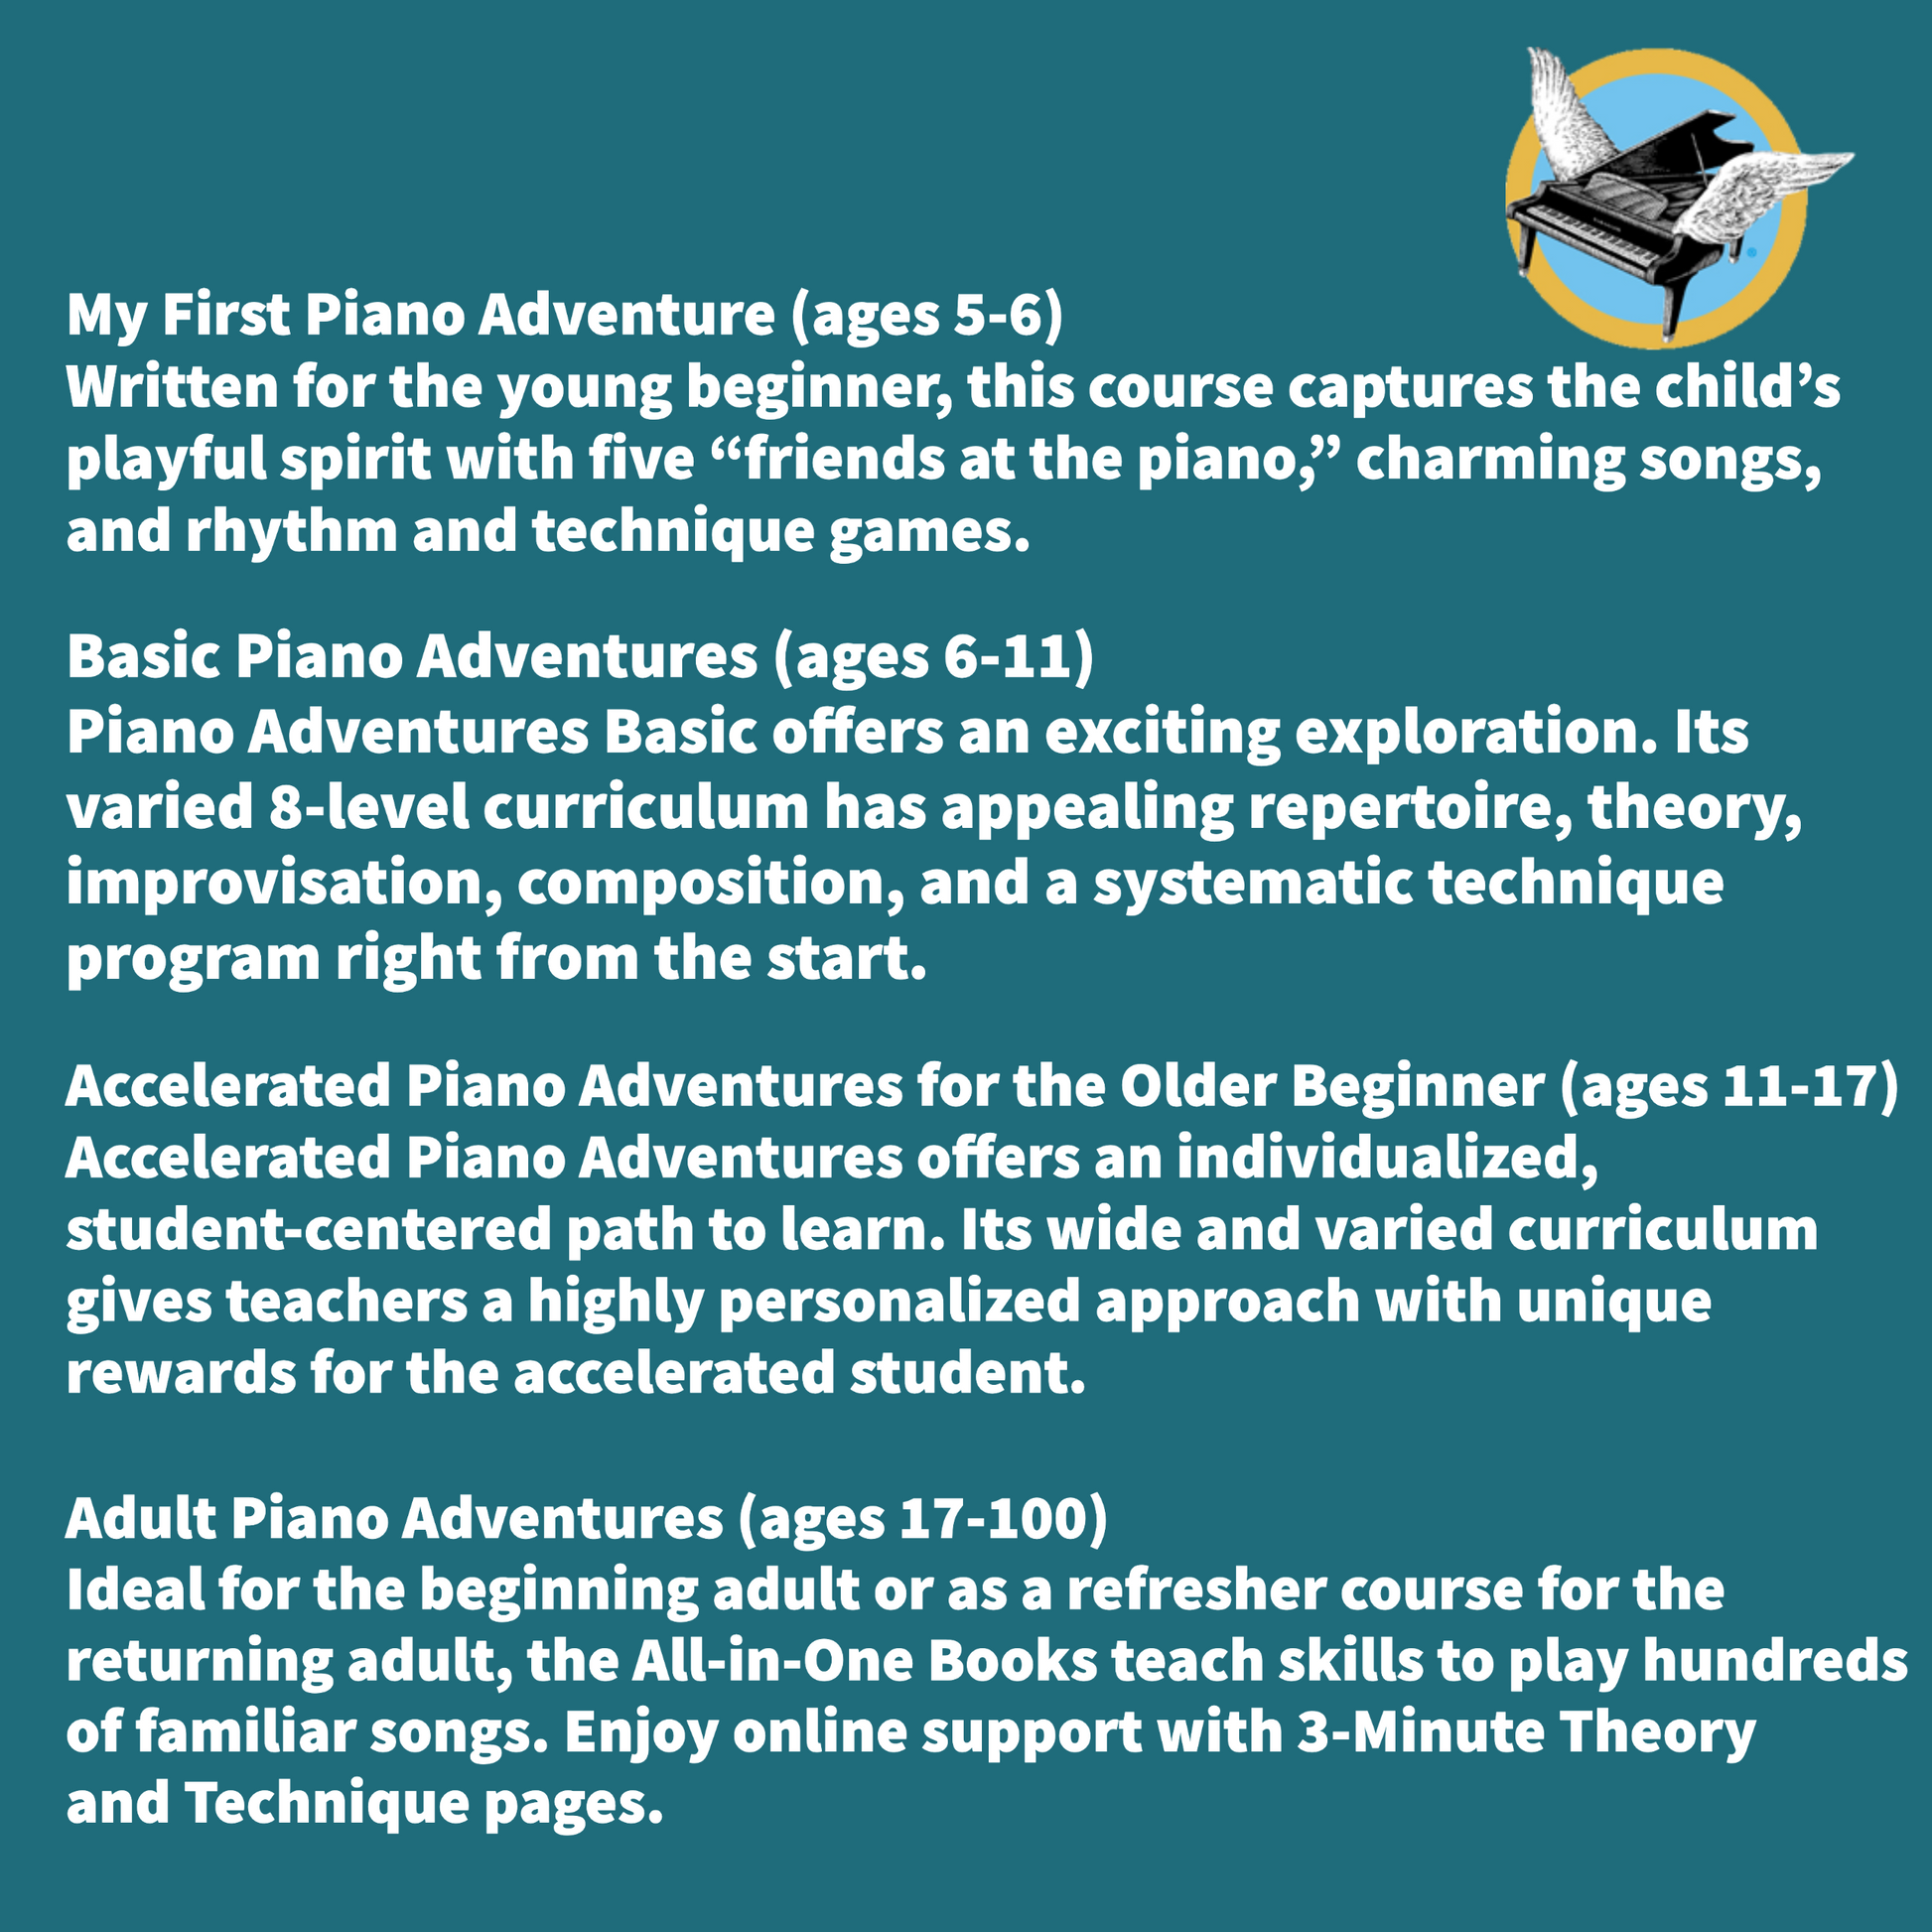 Piano Adventures: Lesson Level 3A Book (2Nd Edition) & Keyboard